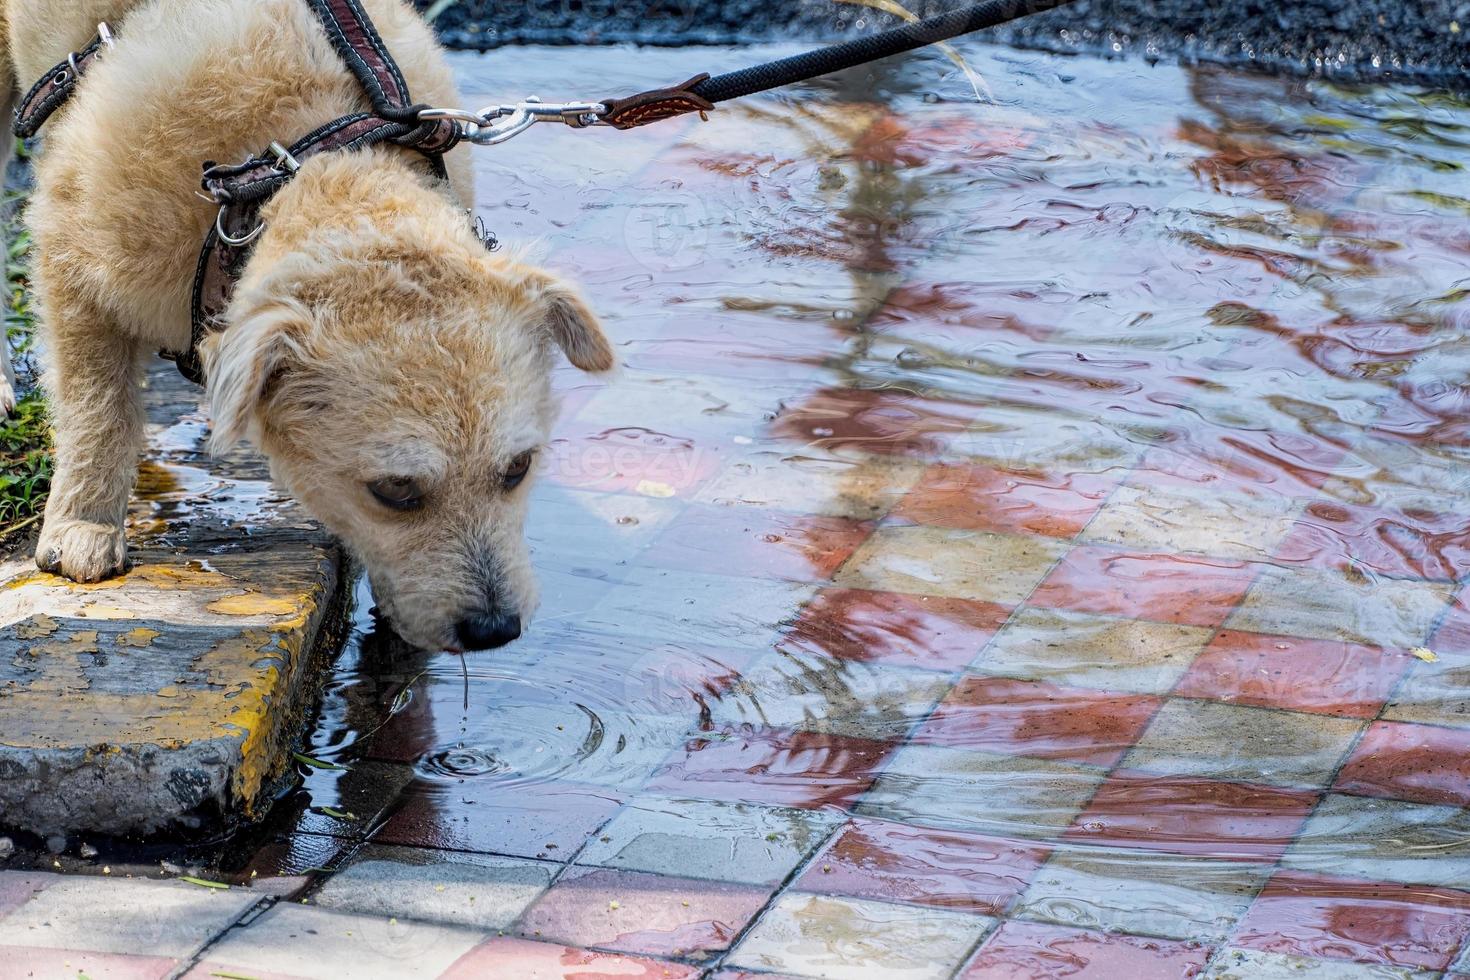 puppy in the street, drinking water from a puddle after the rain. photo